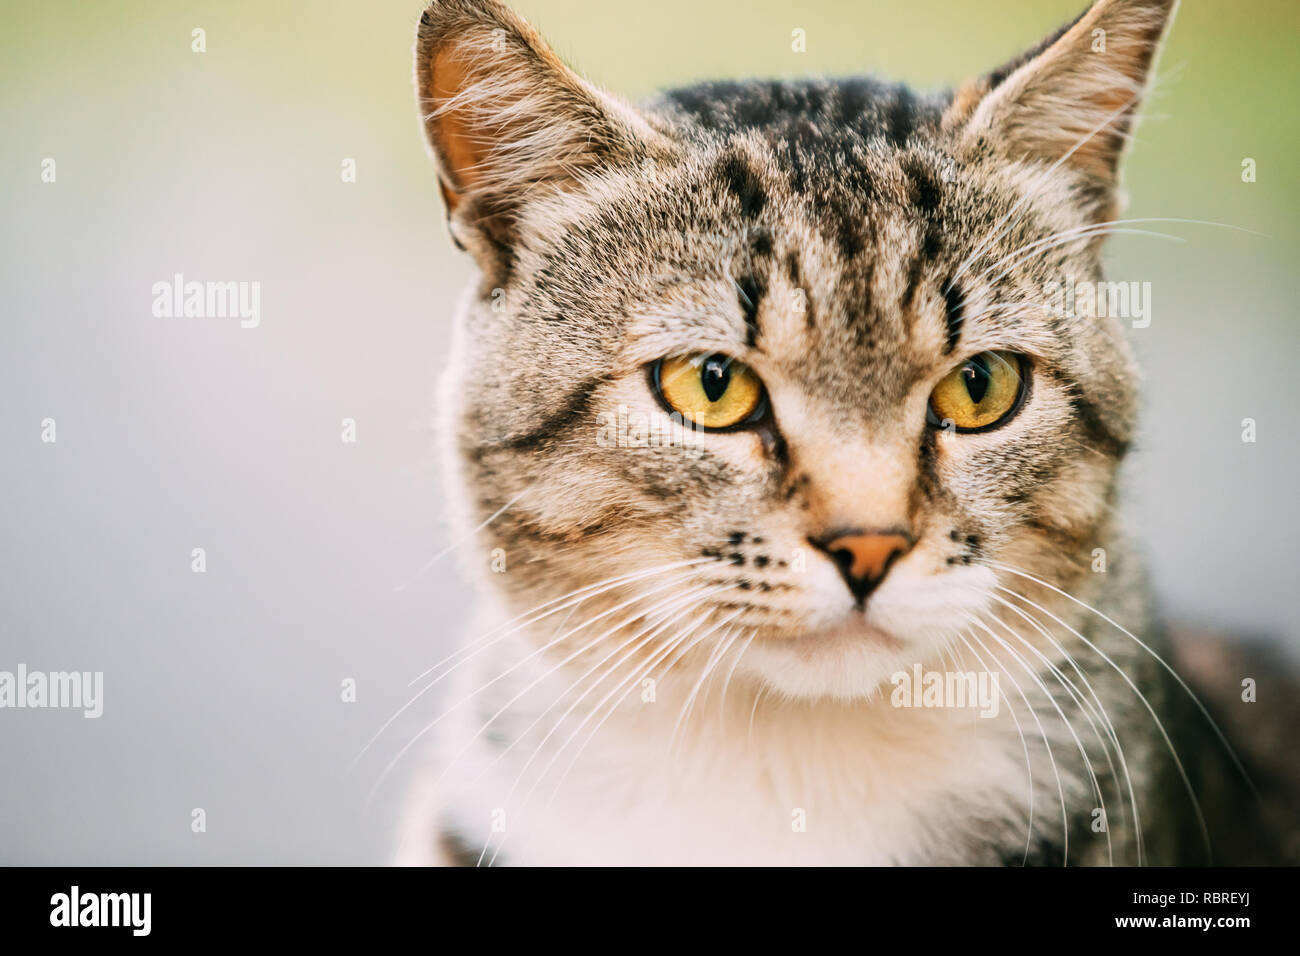 Portrait Of Gray And White Mixed Breed Cat Stock Photo